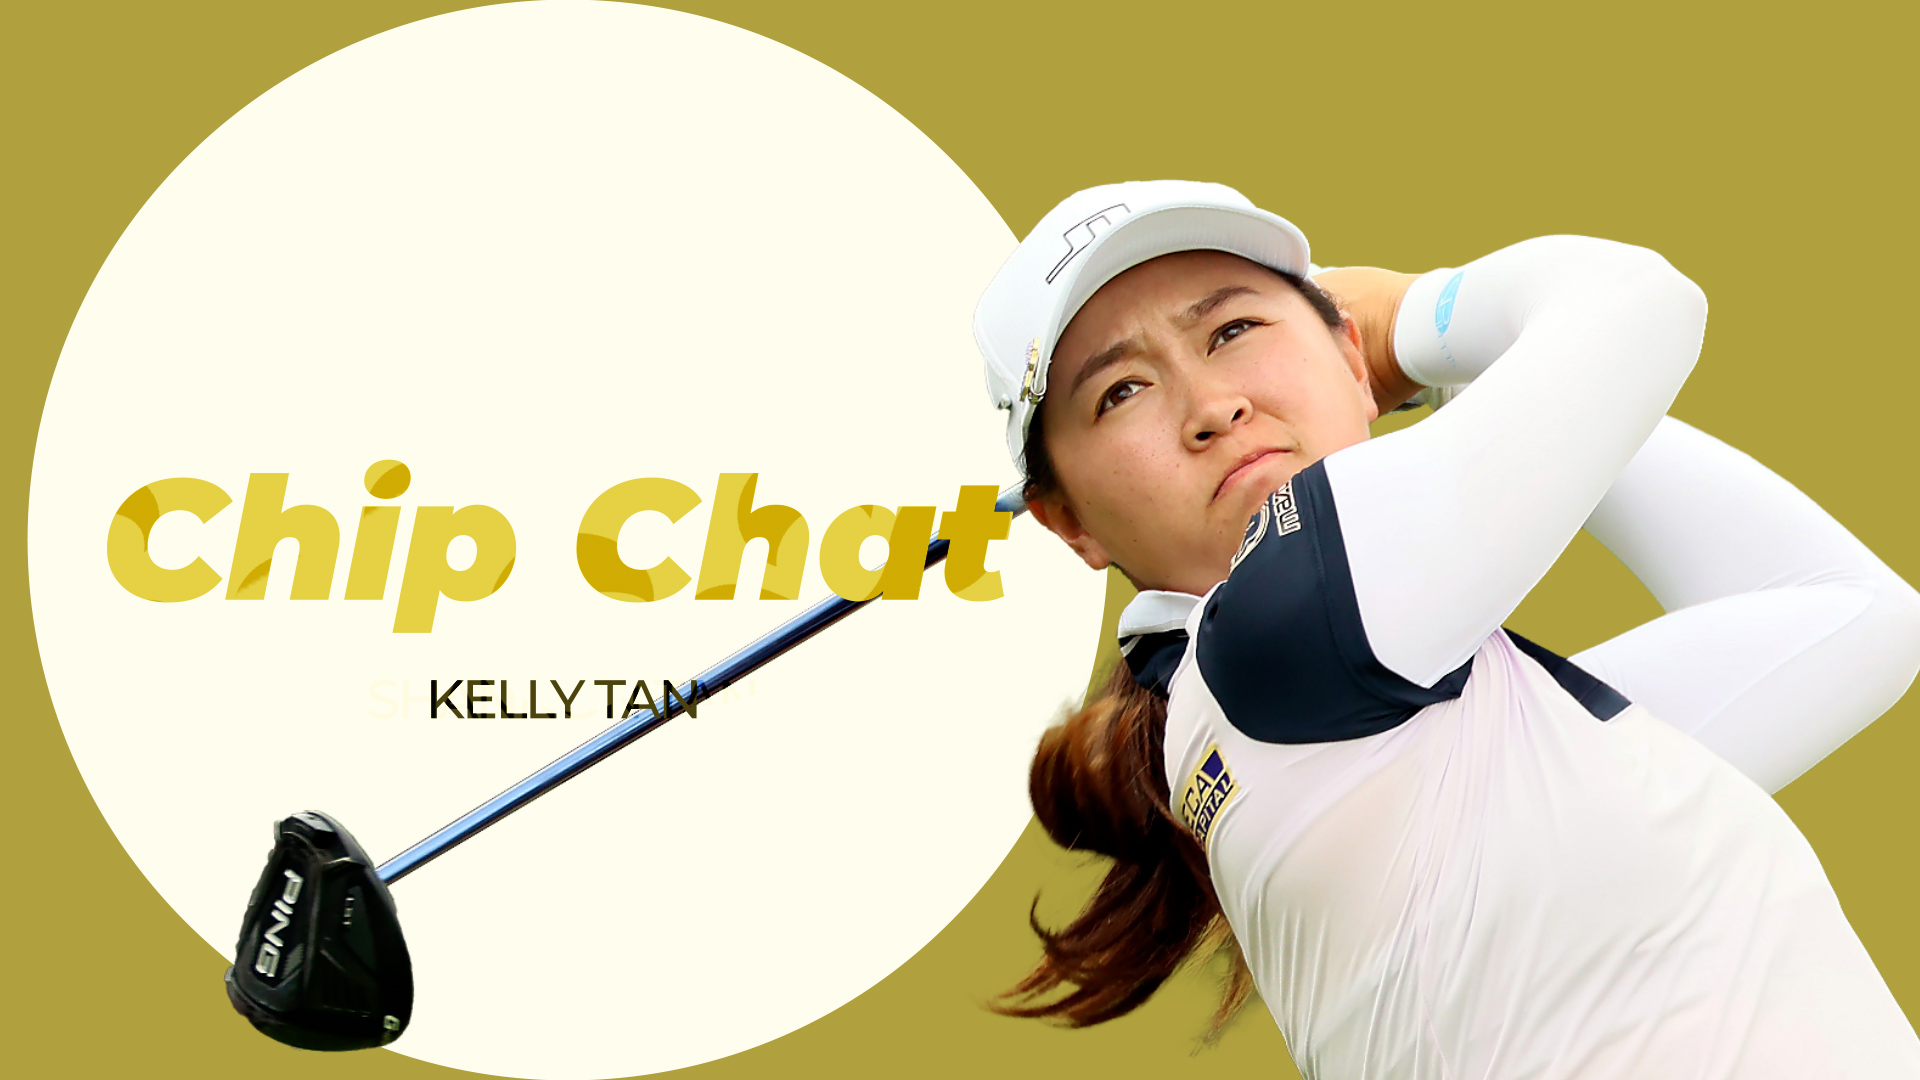 Chip Chat with Kelly Tan: A fun interview with Malaysia's top lady golfer